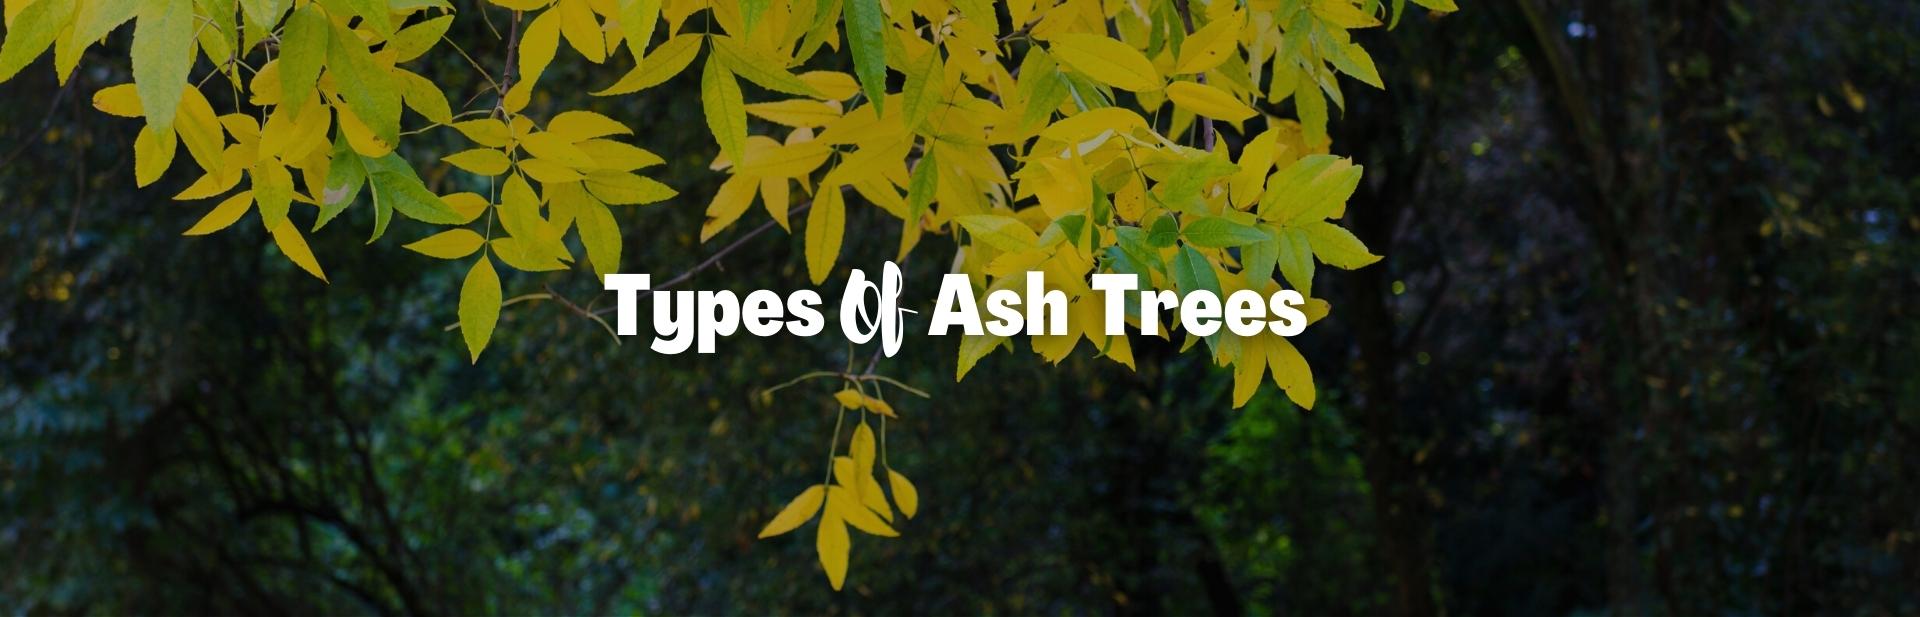 14 Types of Ash Tree: Pictures, Facts and Natural Beauty